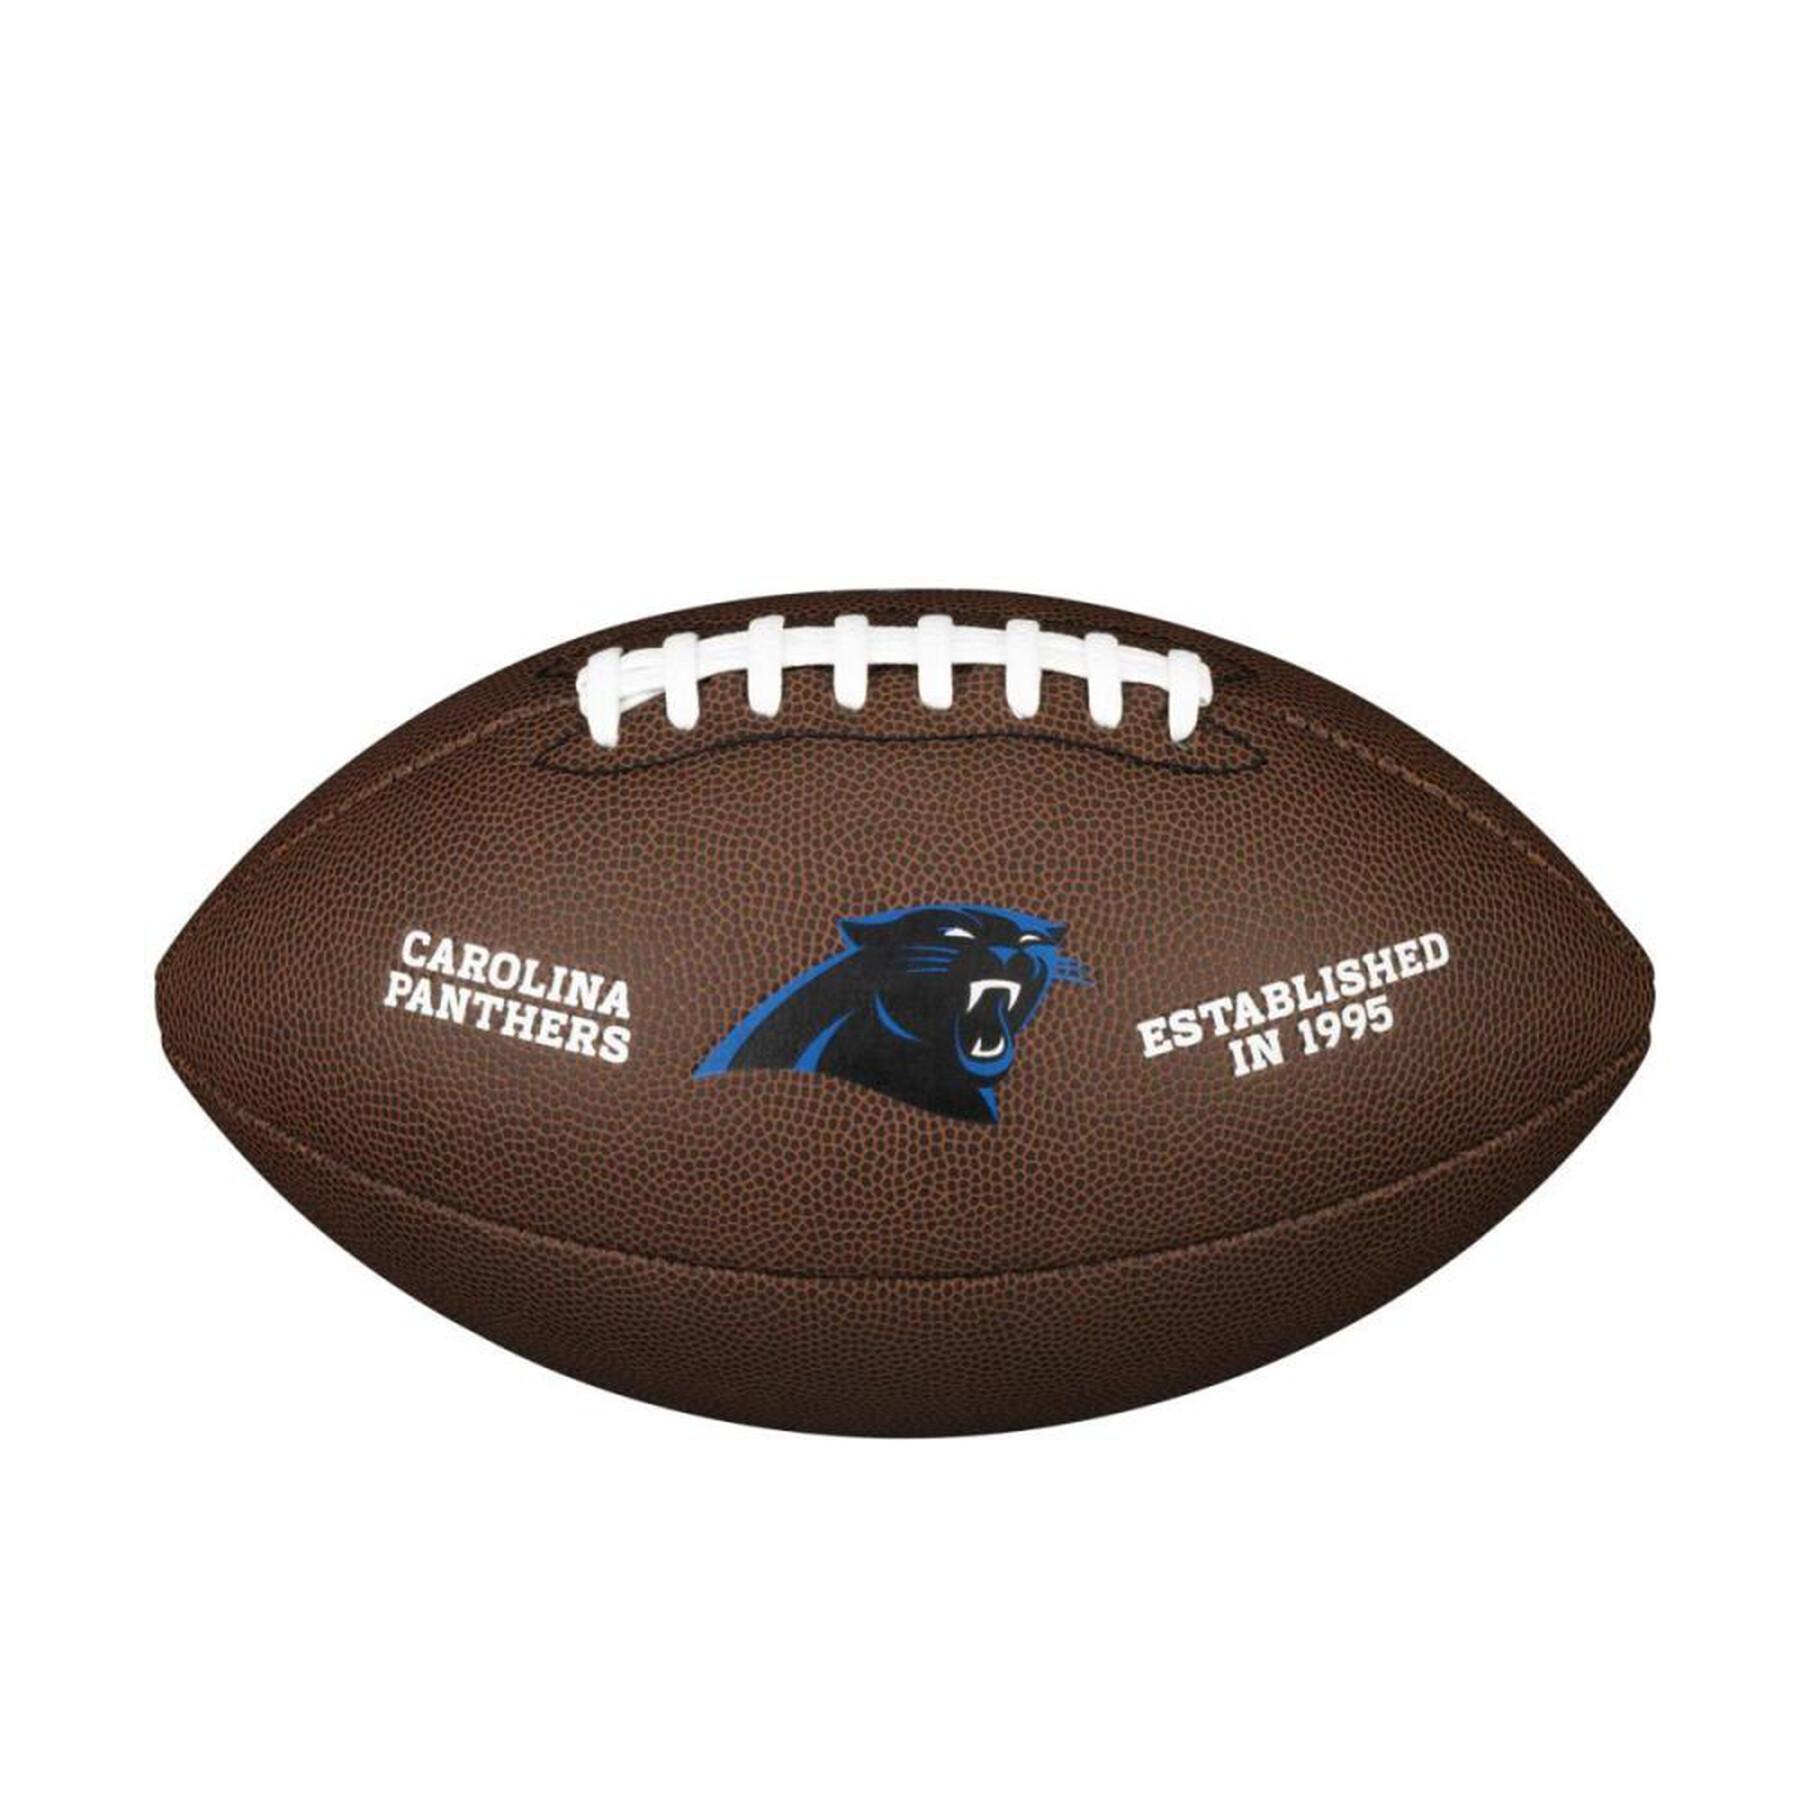 American Football Wilson Panthers NFL Licensed